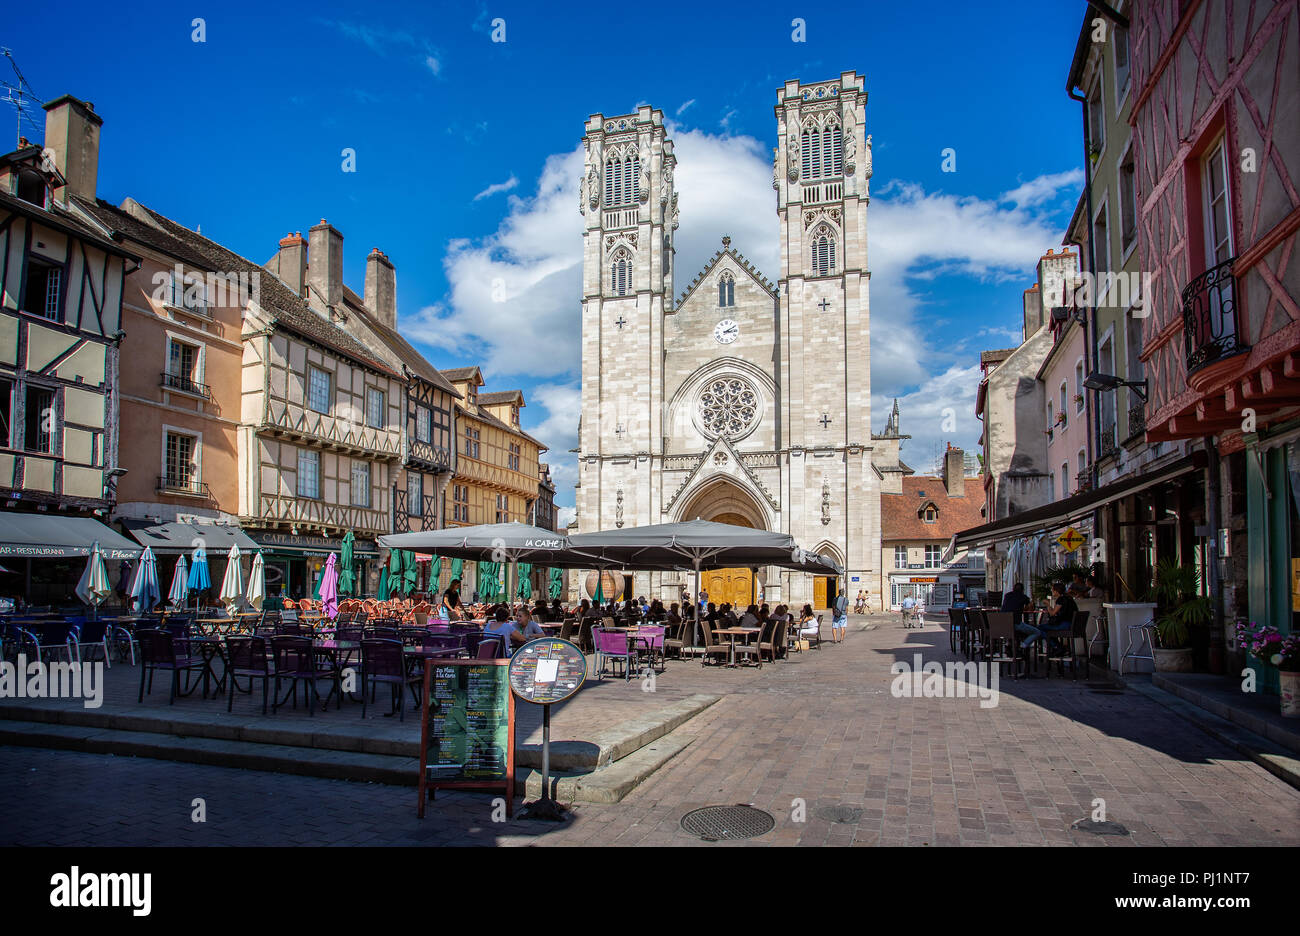 St Vincents Cathedral and cafe culture in Place St Vincent, Chalon sur Saone, Burgundy, France on 29 August 2018 Stock Photo